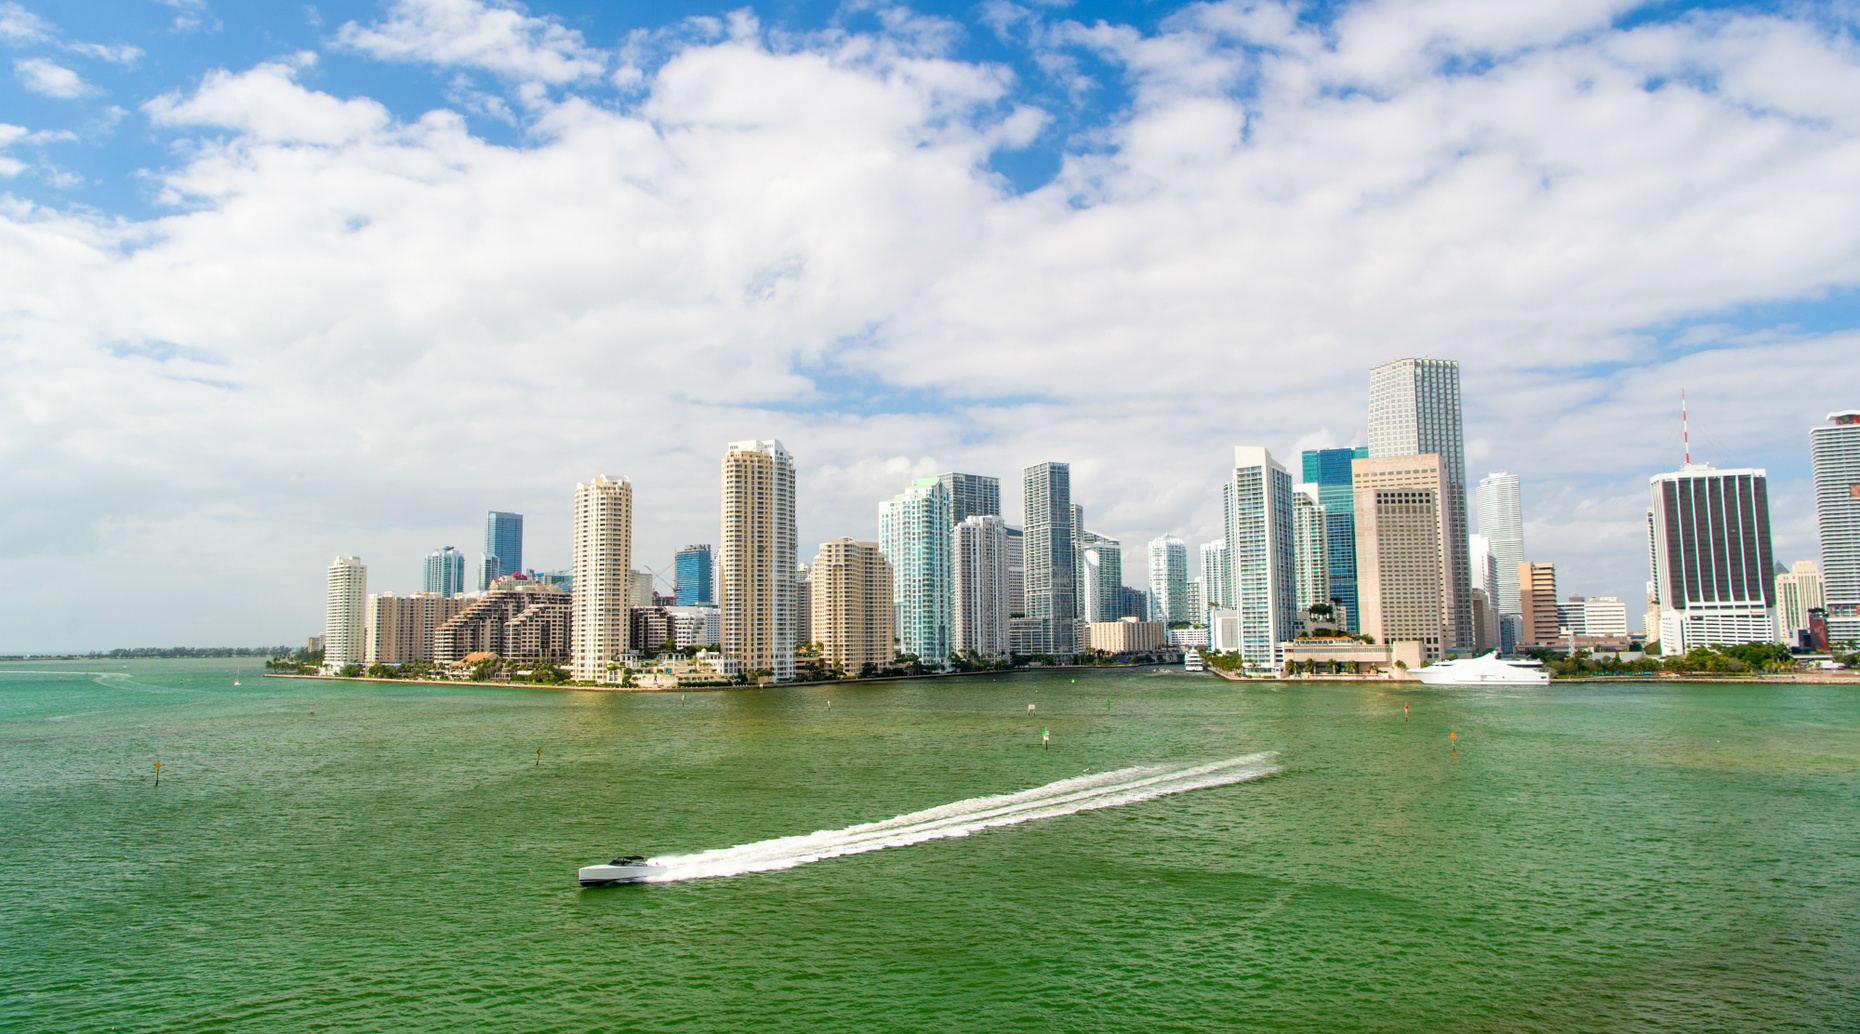 Ft Lauderdale Hotel to Port of Miami or Miami Hotels Transfer